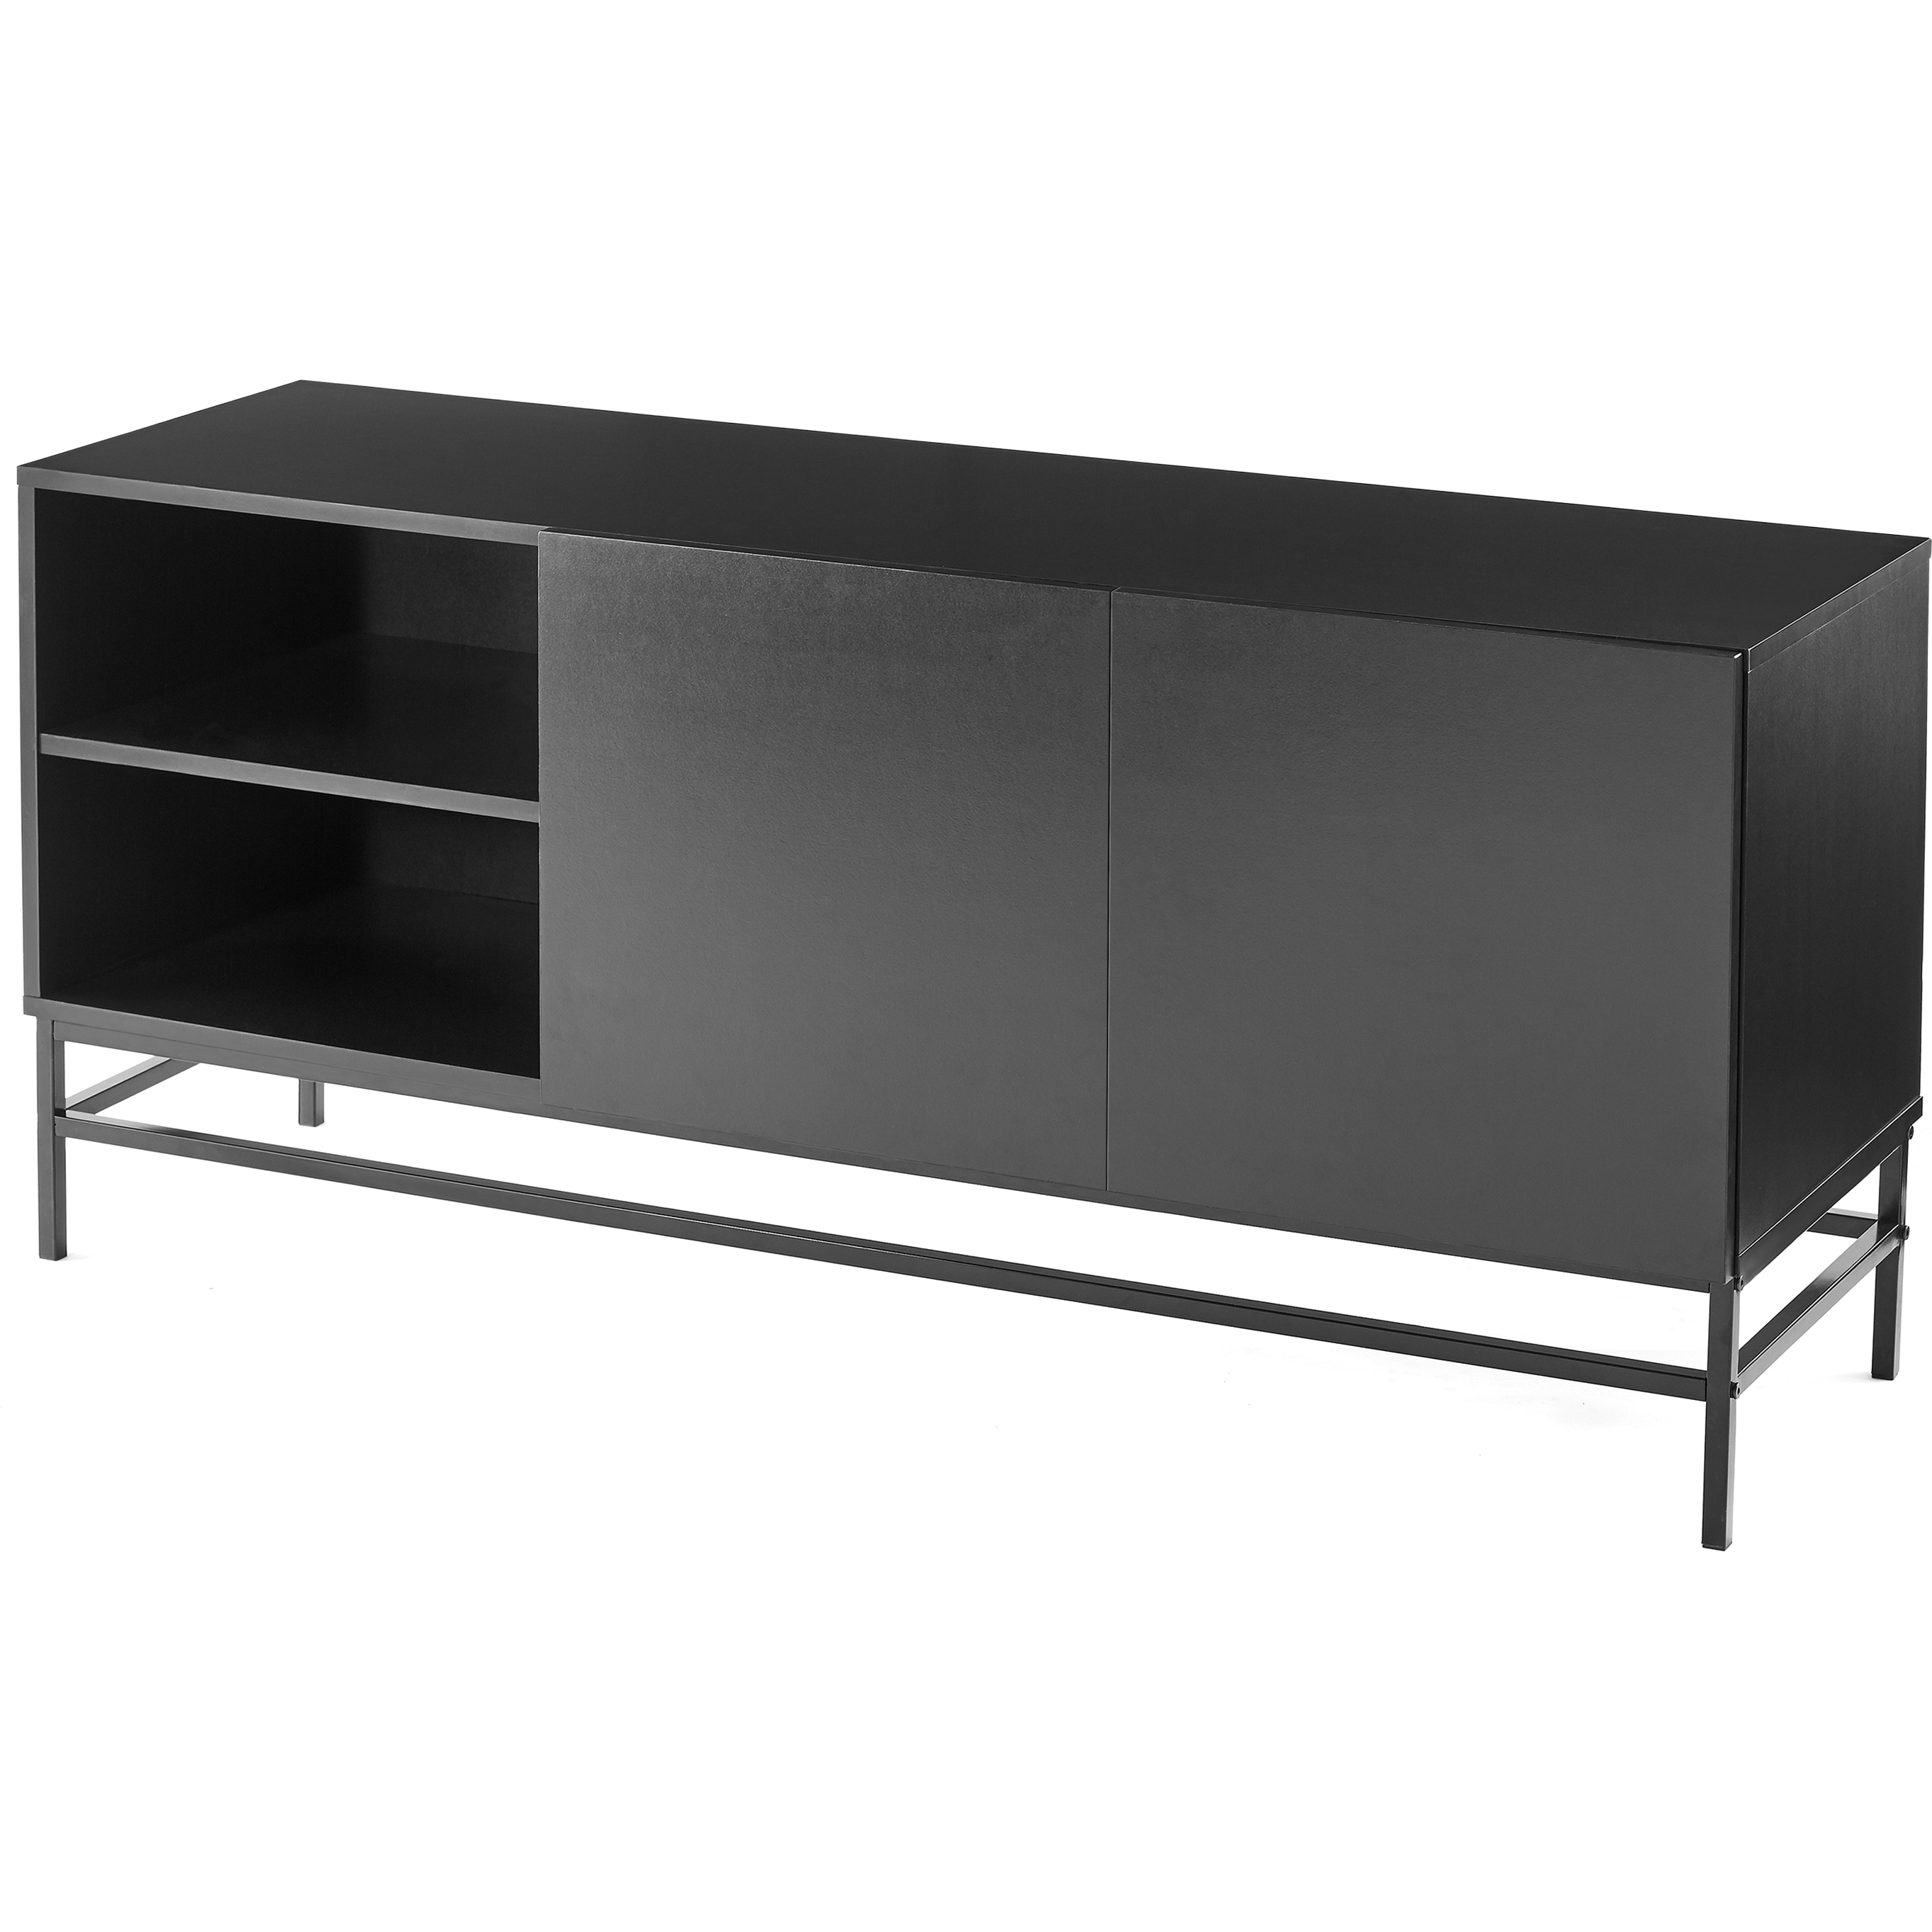 Mainstays Sumpter Park Console Table, Black - image 2 of 6